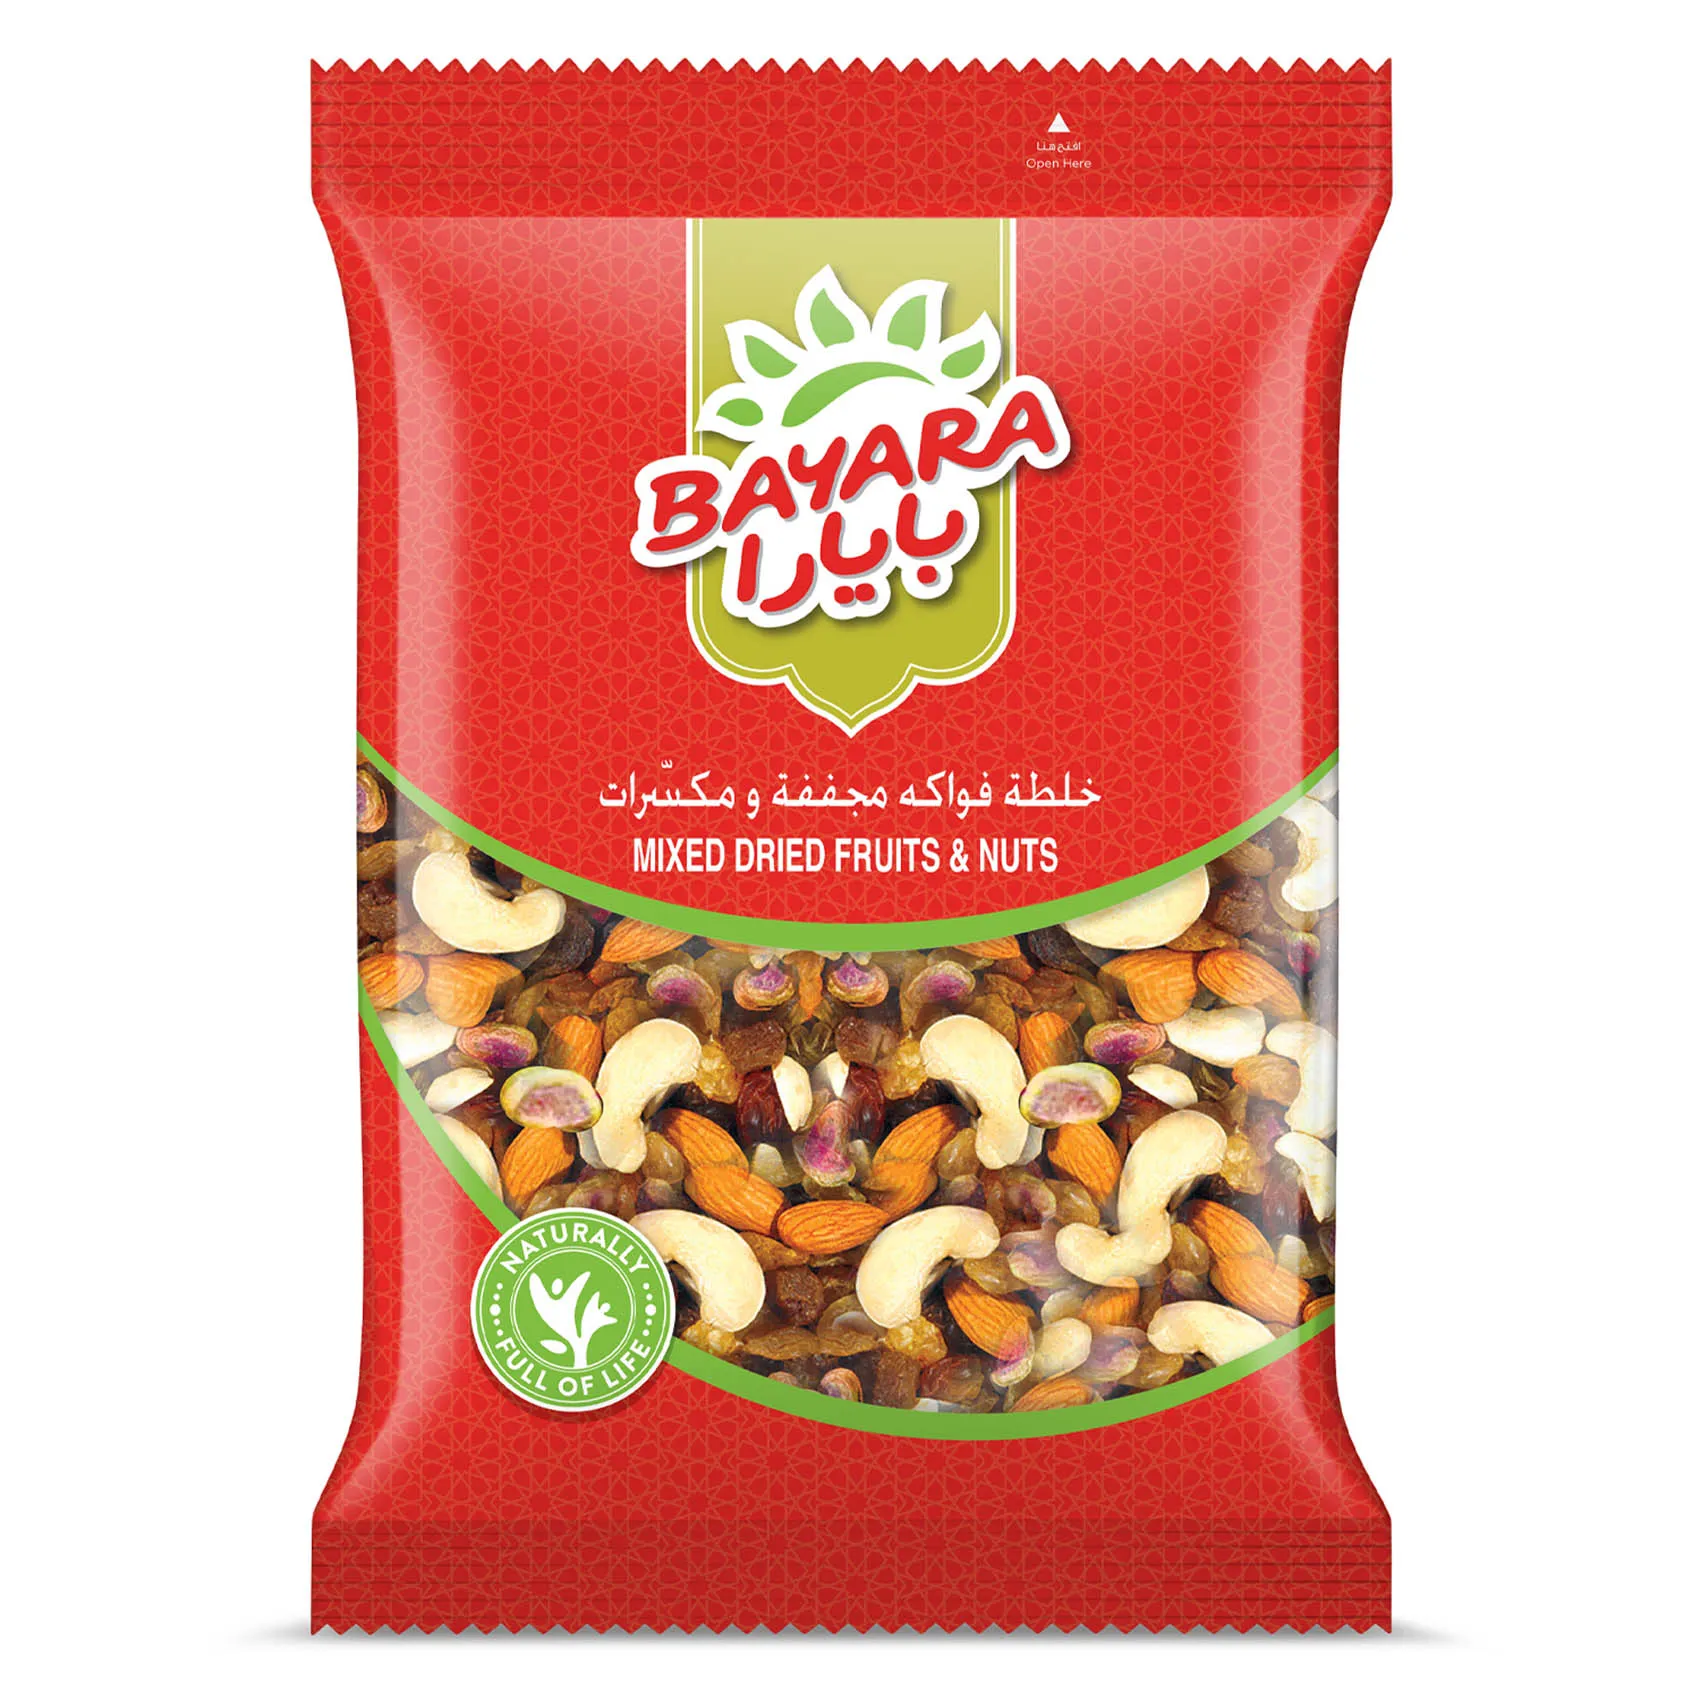 MIXED DRIED FRUITS & NUTS 200G